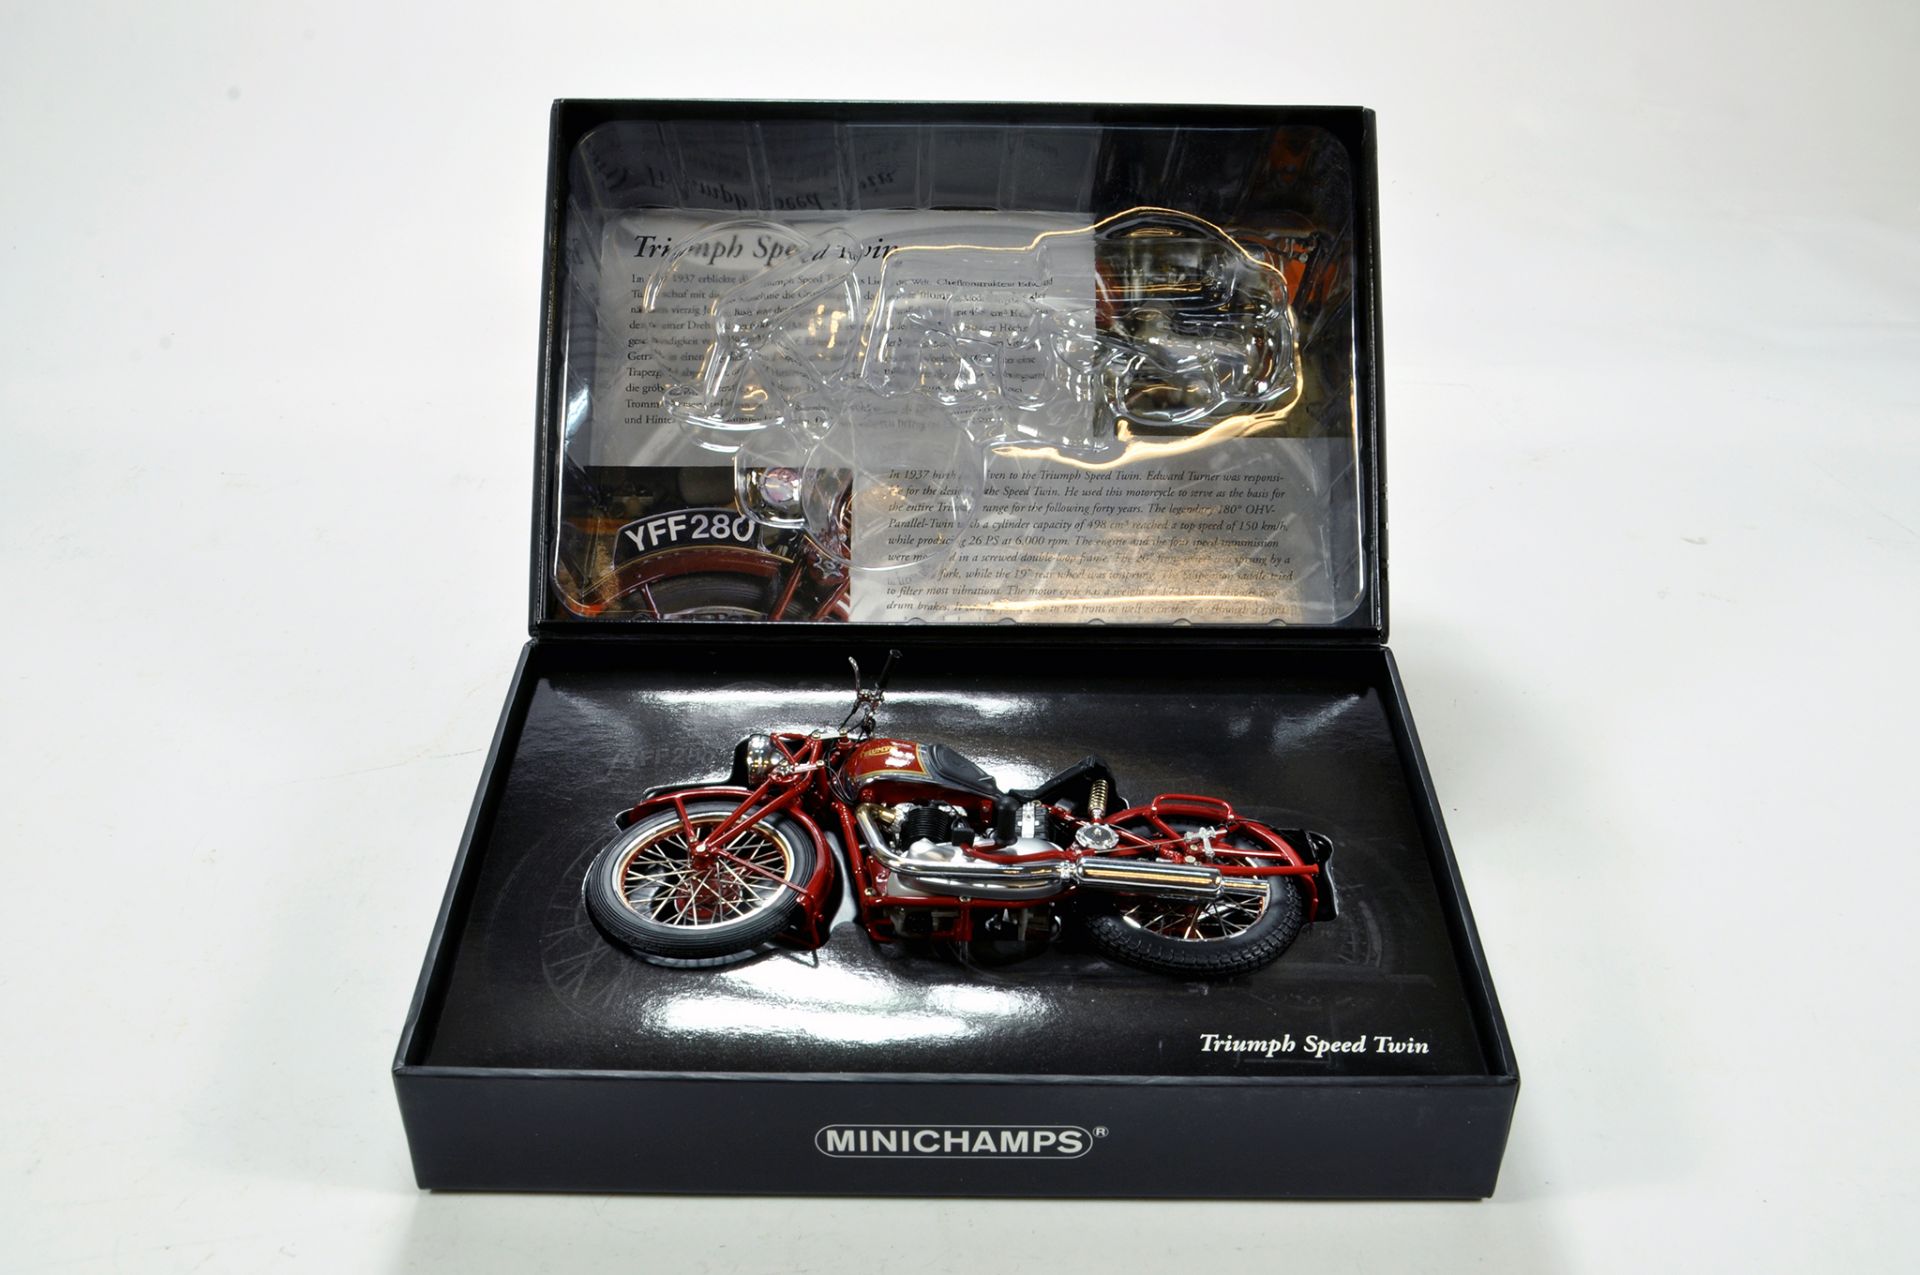 Scarce, Limited and very Exclusive Minichamps 1/12 Triumph 1939 Speed Twin Motorcycle. NM in Box.